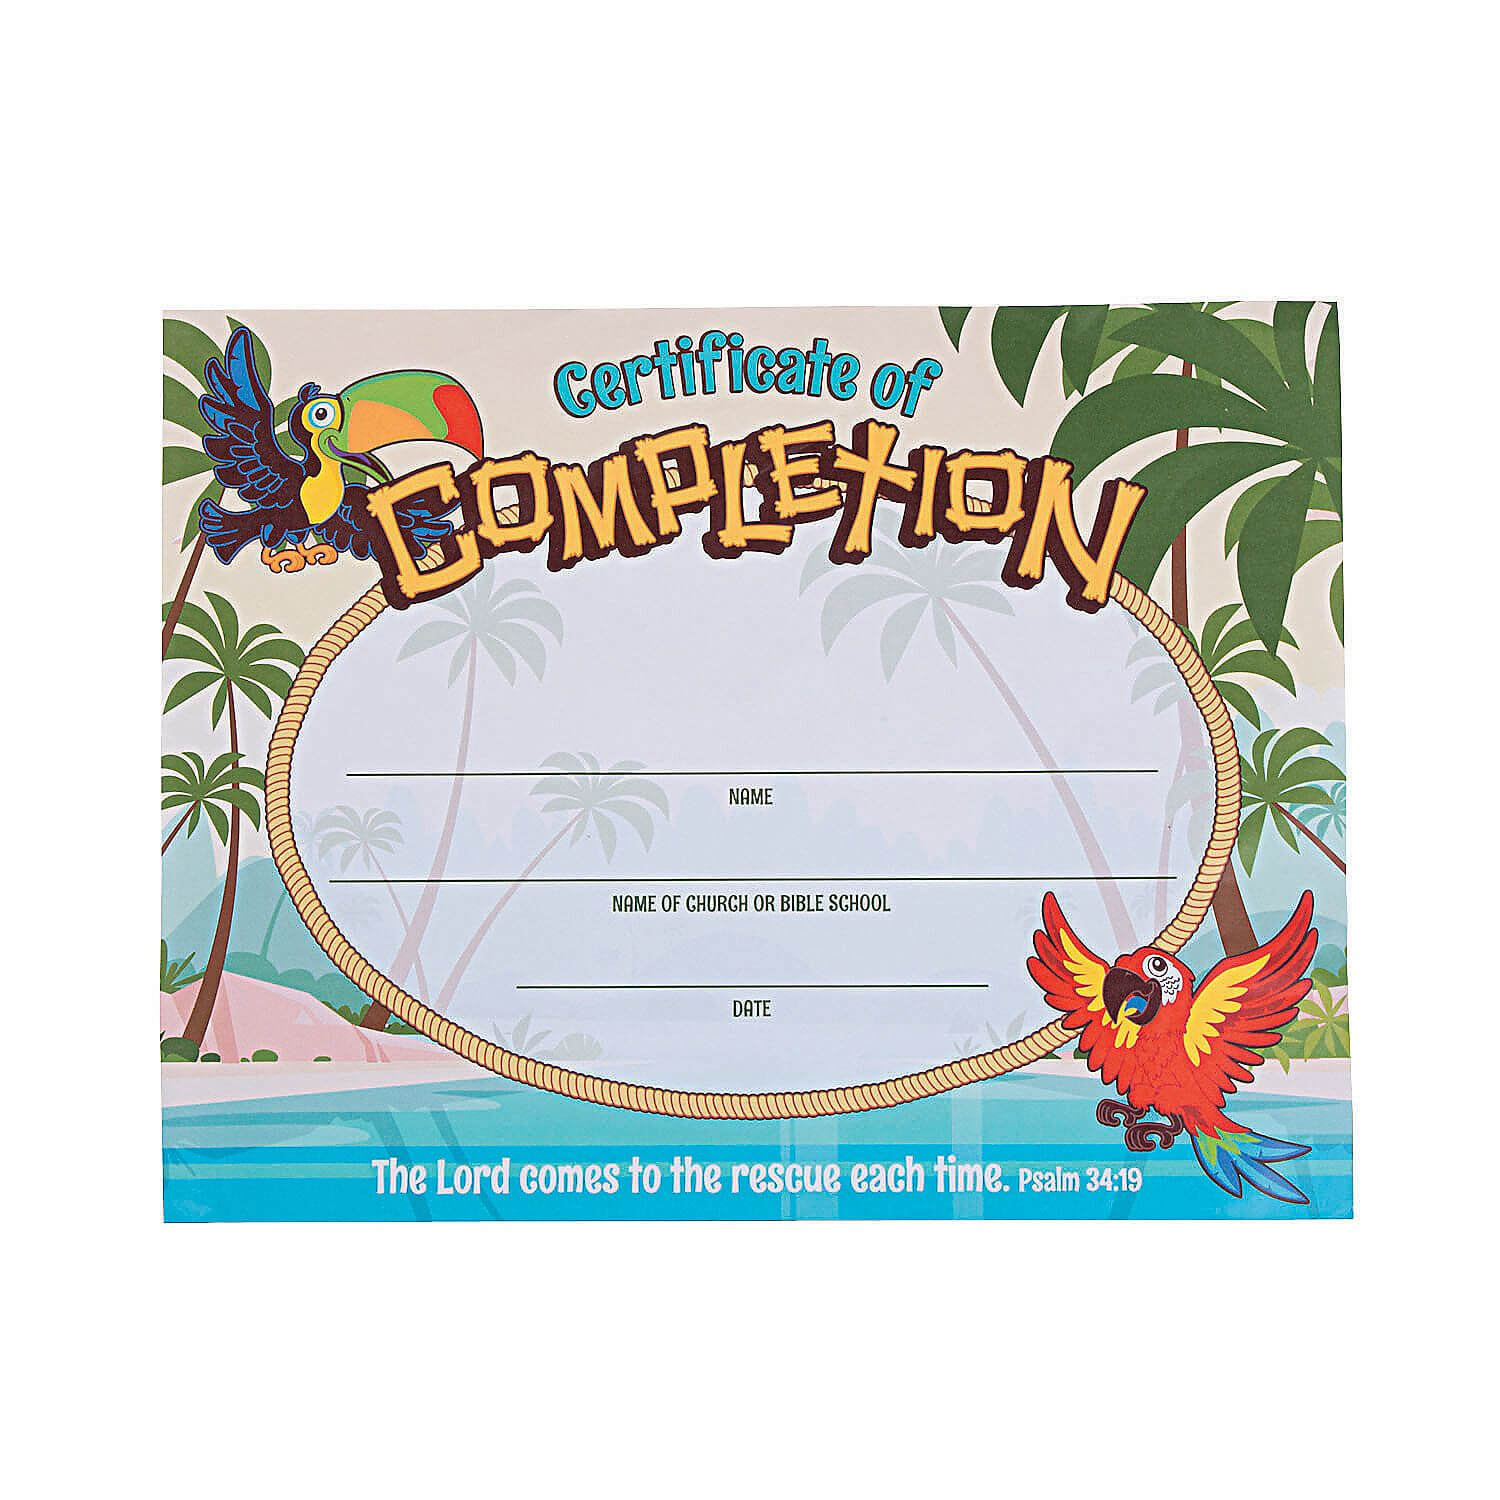 Island Vbs Certificates Of Completion | Certificate With Vbs Certificate Template